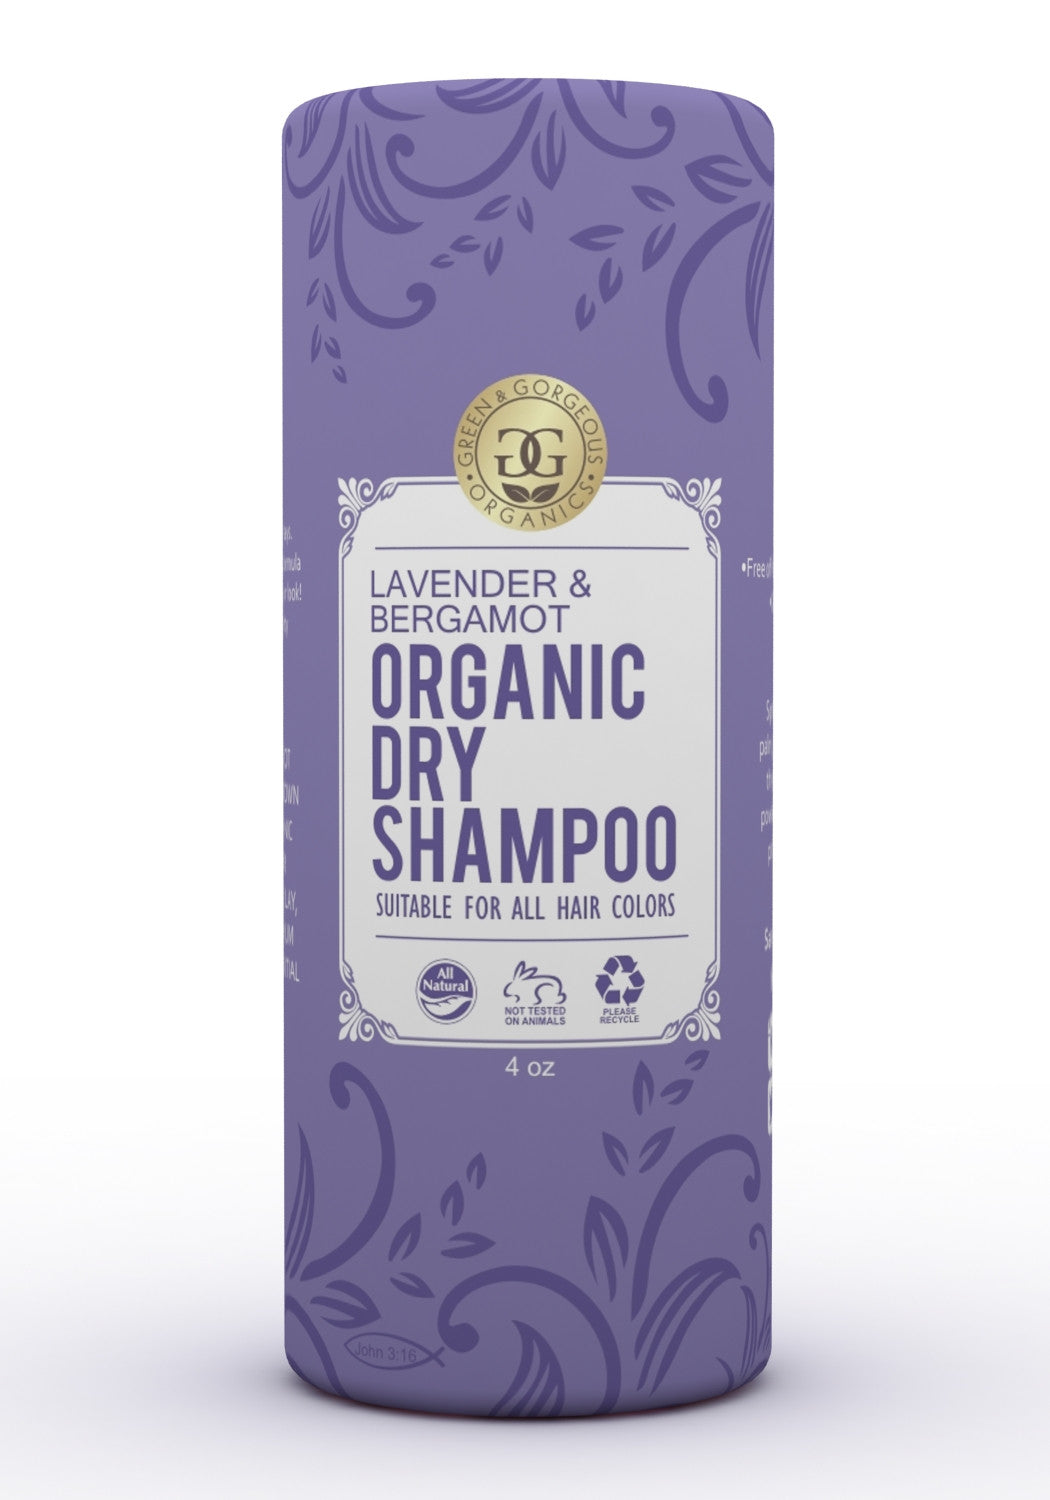 Organic Natural Dry Shampoo Powder Green Laven - Hair LLC All Types & – for Gorgeous Organics, and Oily